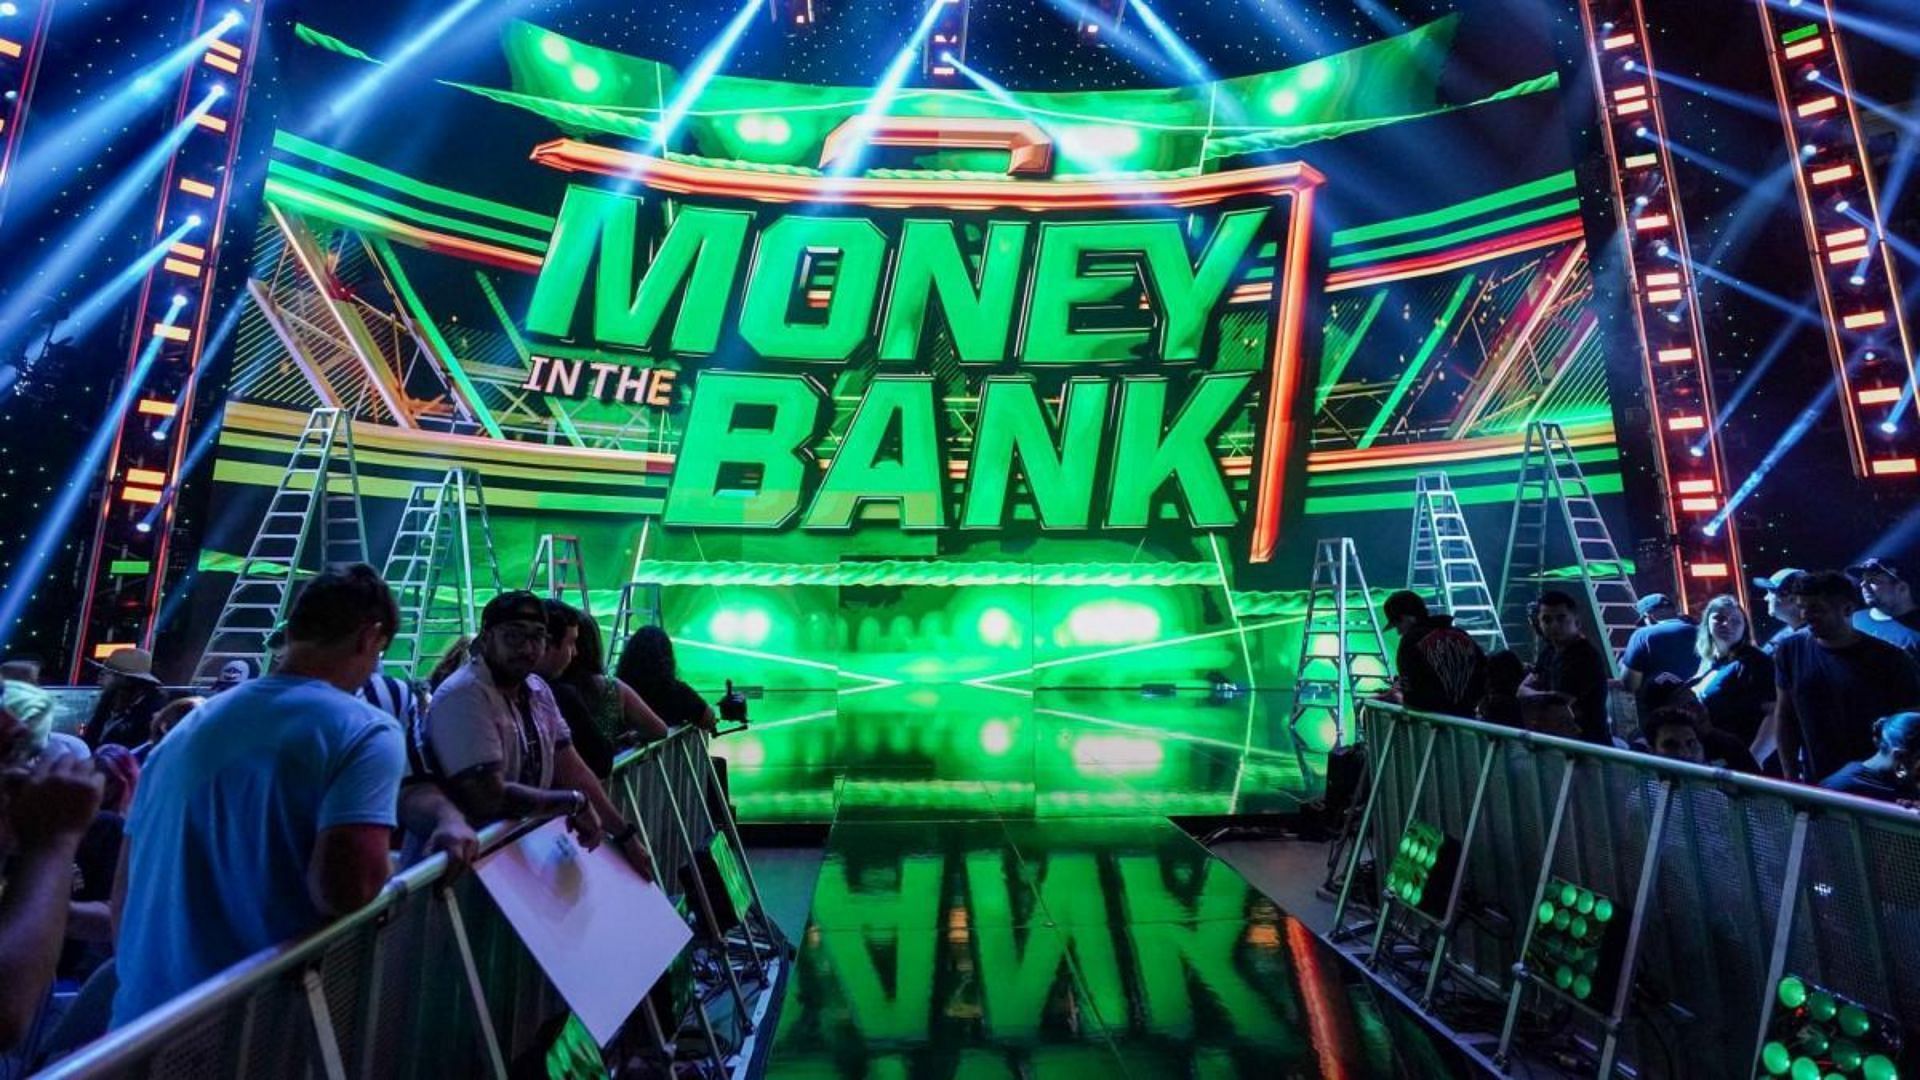 WWE Money in the Bank 2023 will emanate from The O2 Arena in the UK